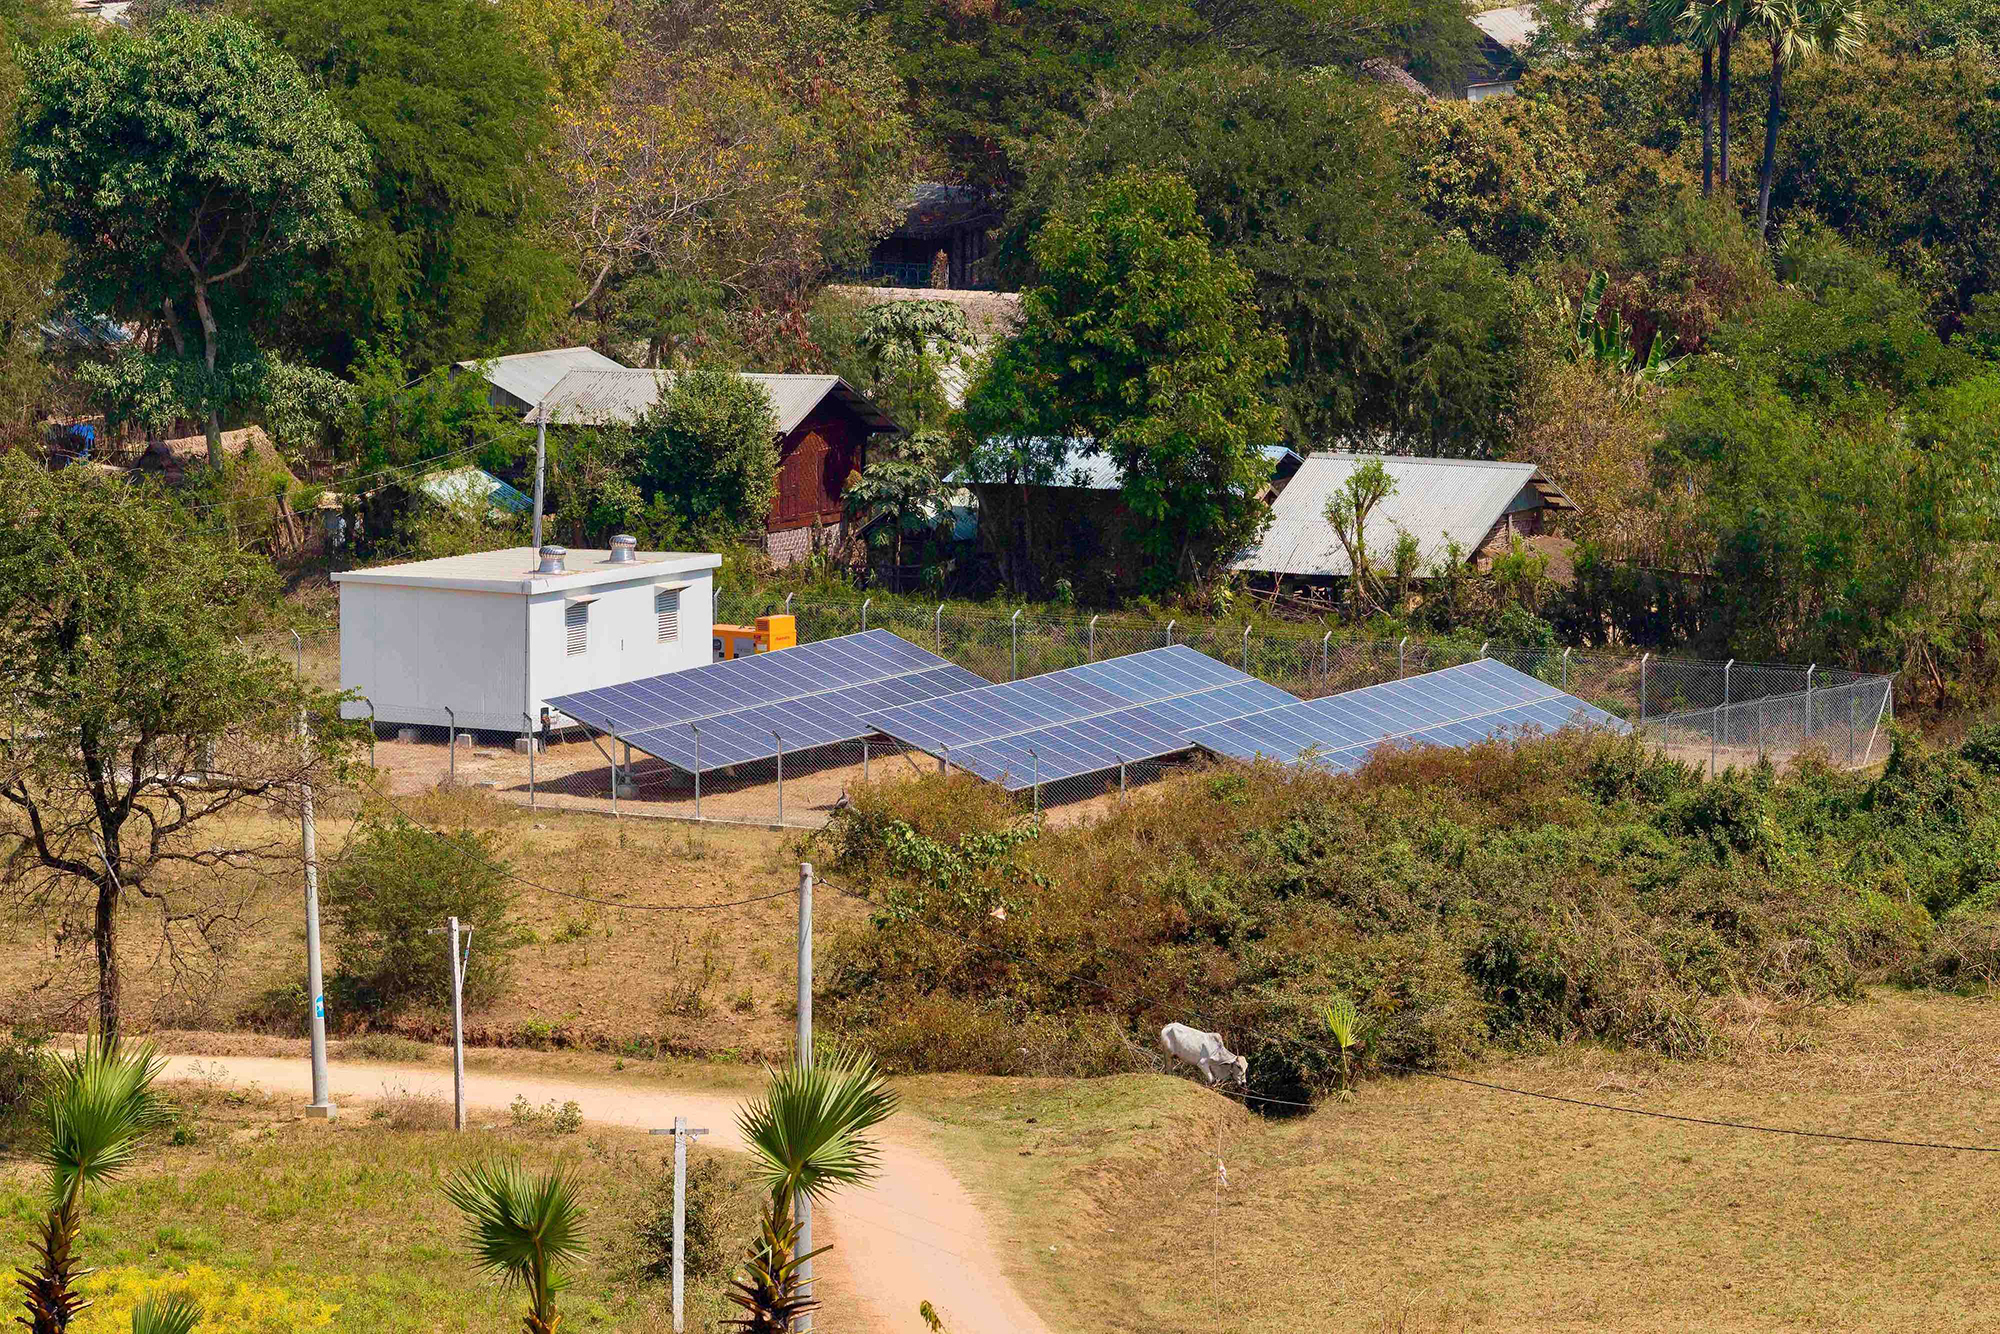 Yoma’s green power project delivers electricity to tens of thousands in Myanmar